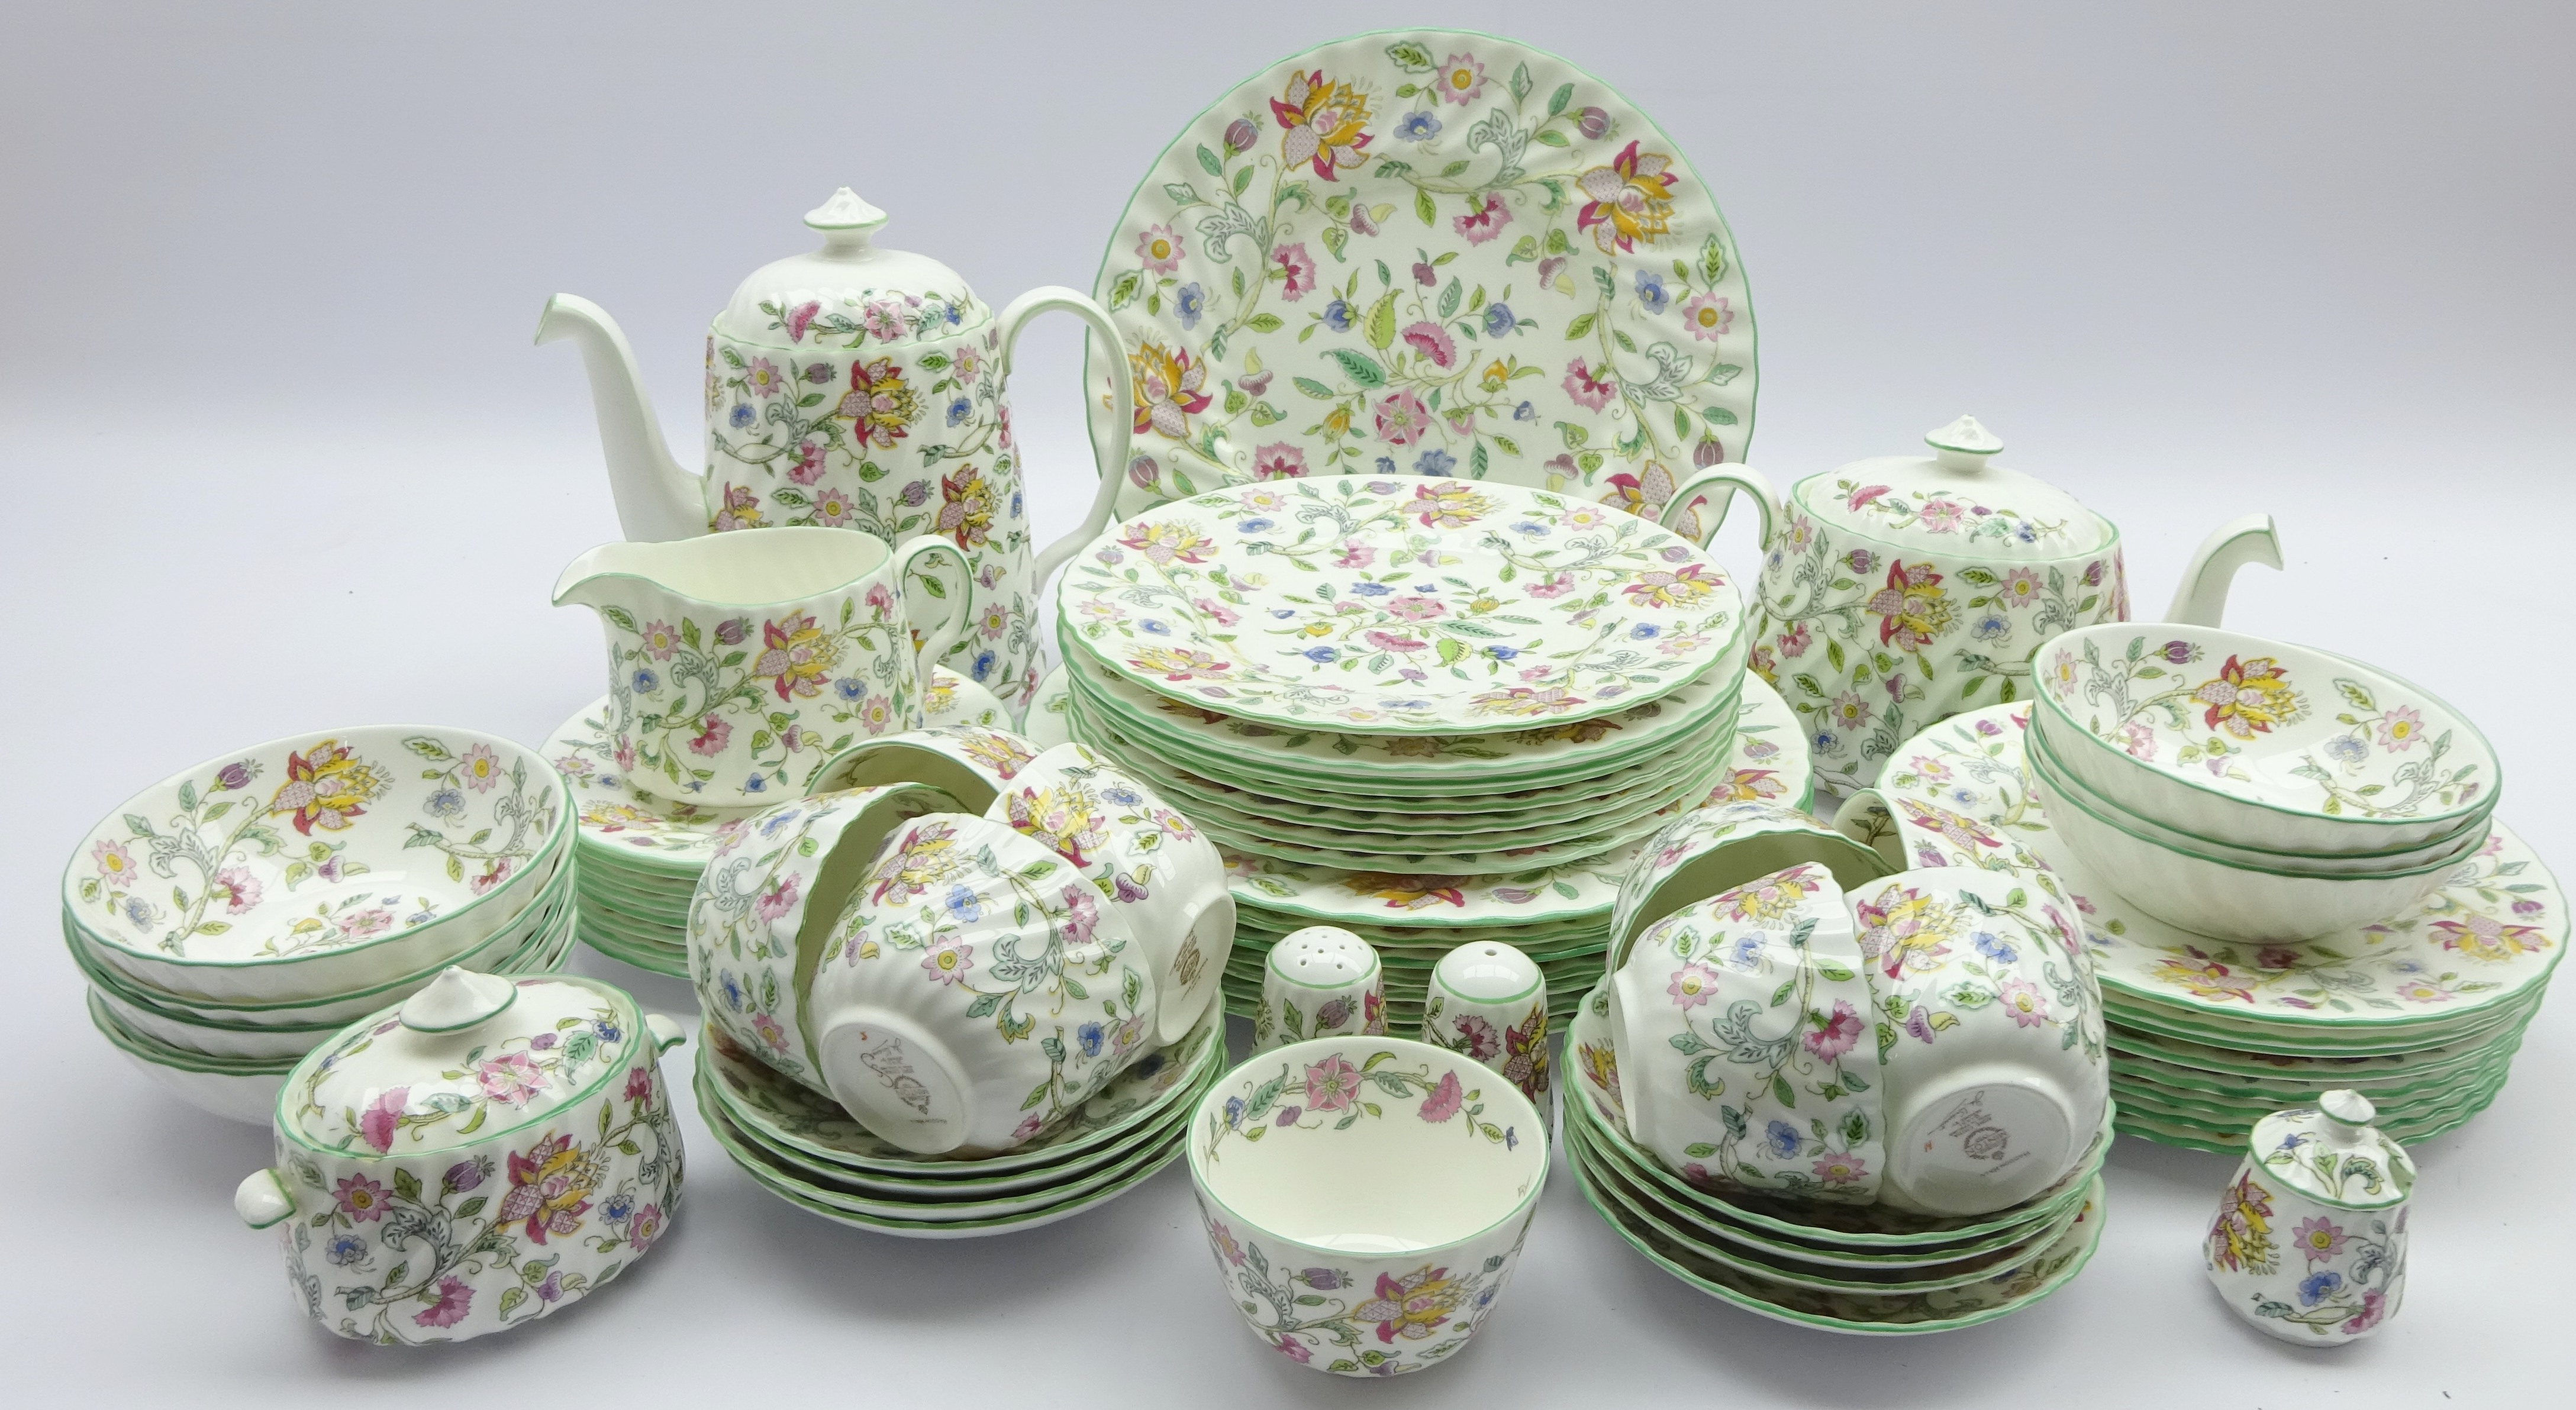 Minton 'Haddon Hall' dinner and tea service, for eight persons including plates in various sizes,